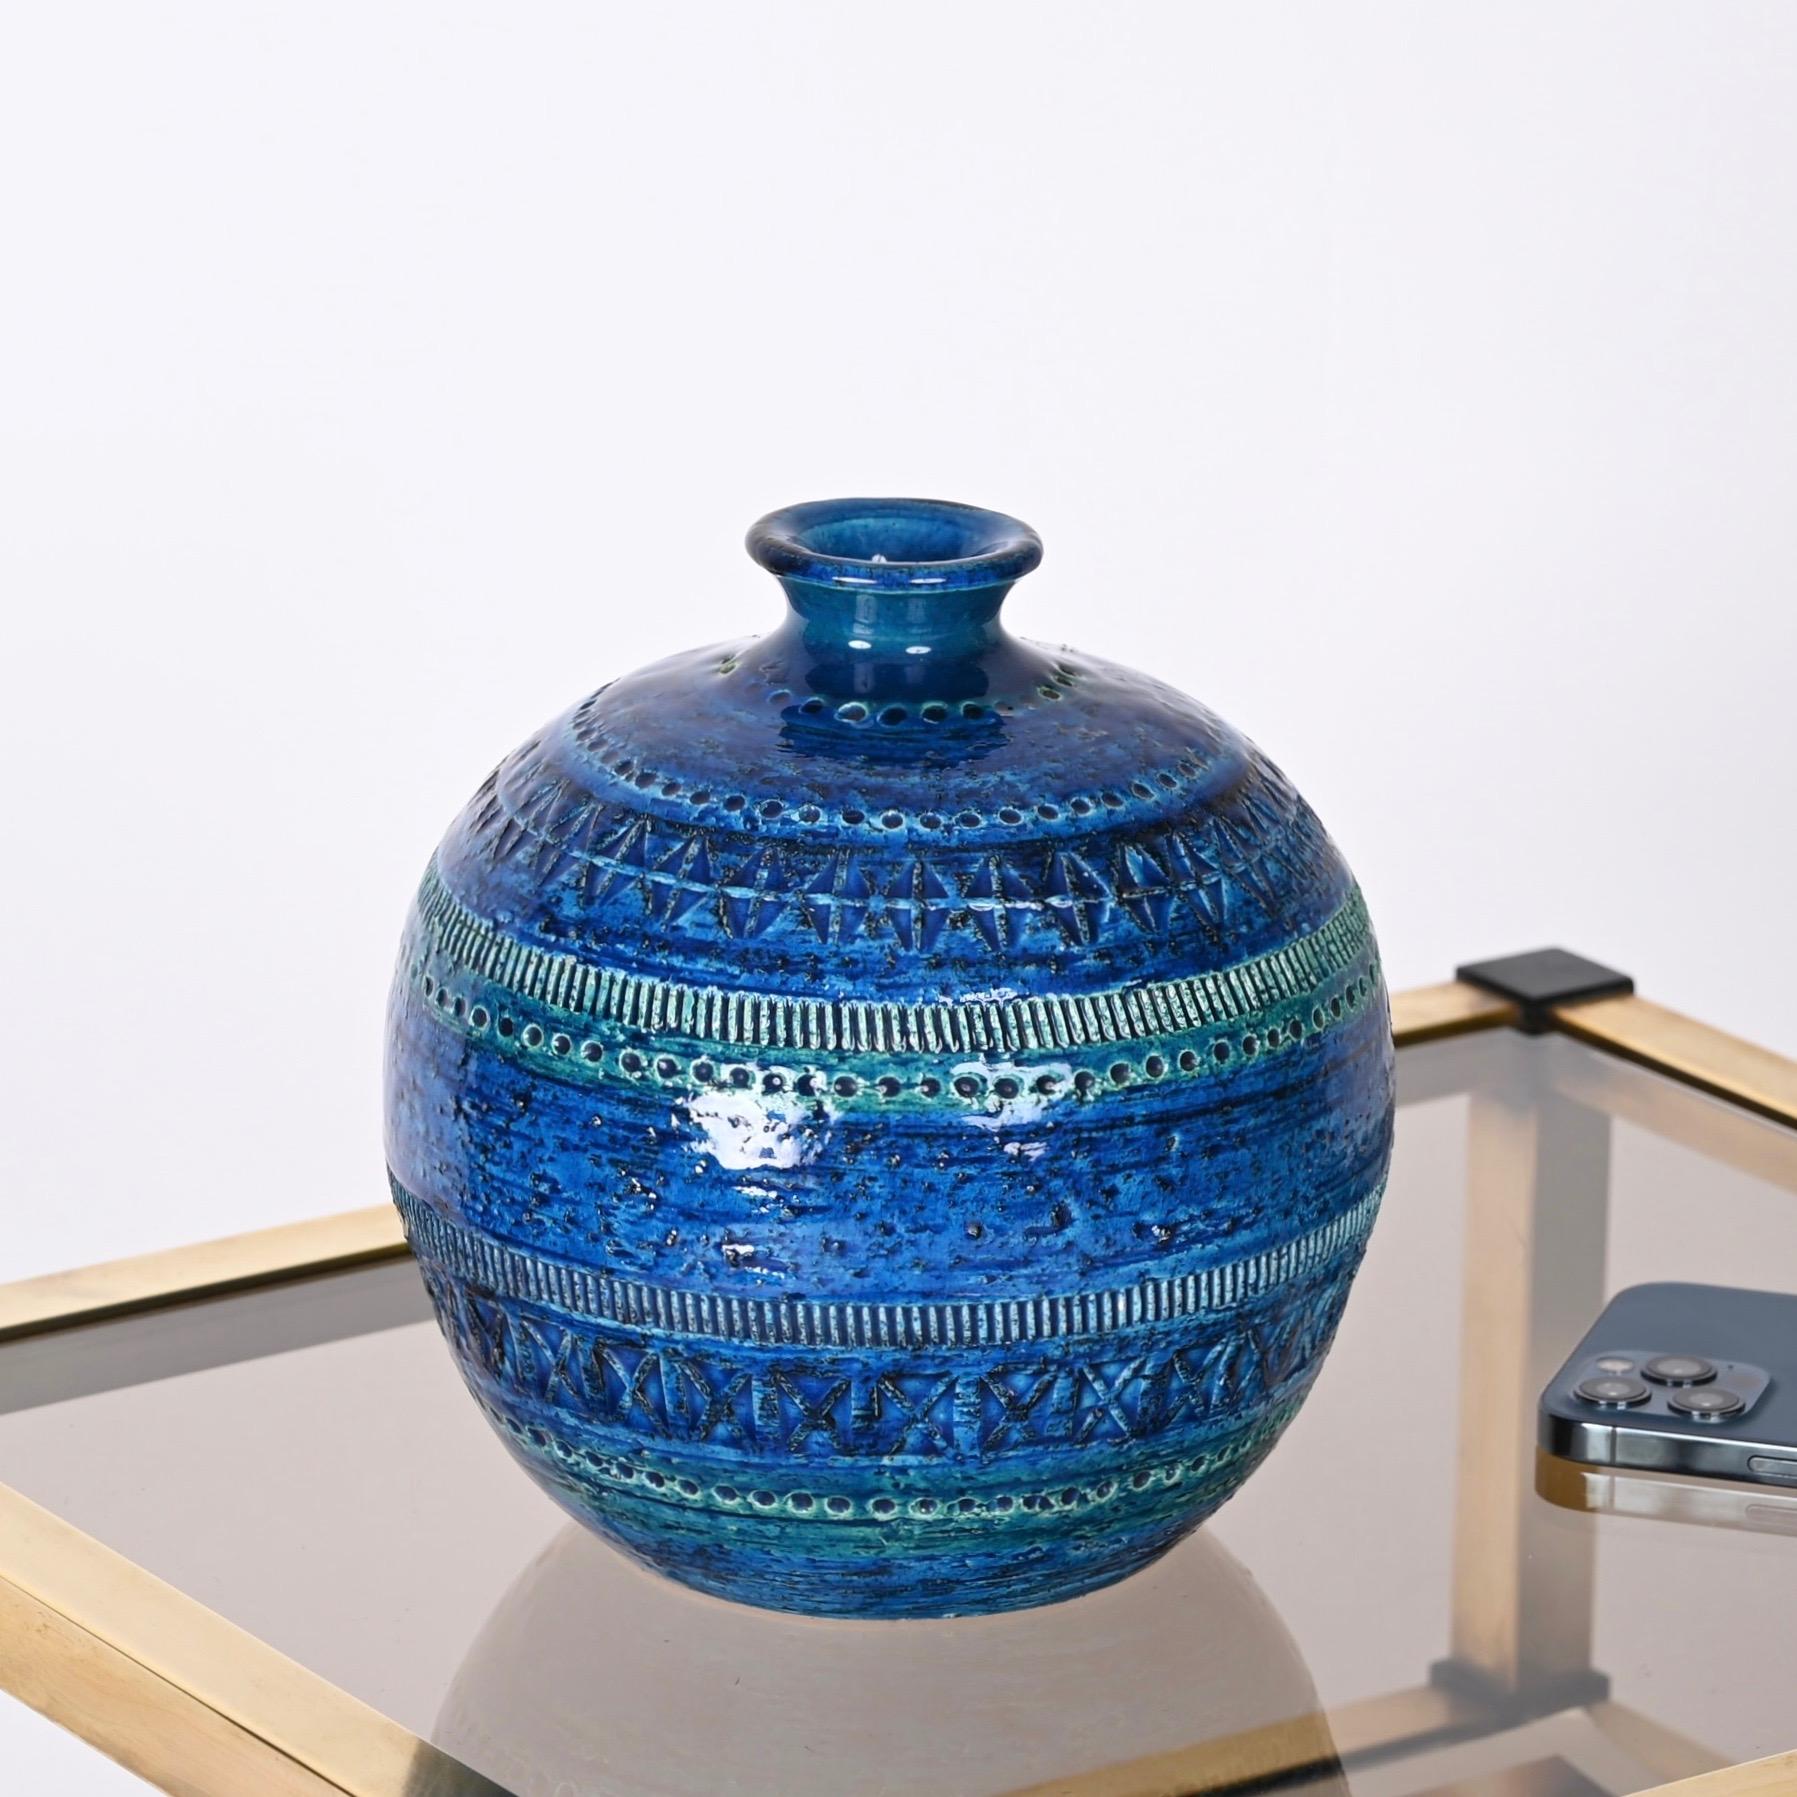 Stunning sphere-shaped terracotta ceramic Rimini blue vase for Bitossi. This magnificent set was designed by Aldo Londi in Italy during 1960s.

This fantastic piece is wonderful thanks to the blue, green and turquoise terracotta ceramic glazed by